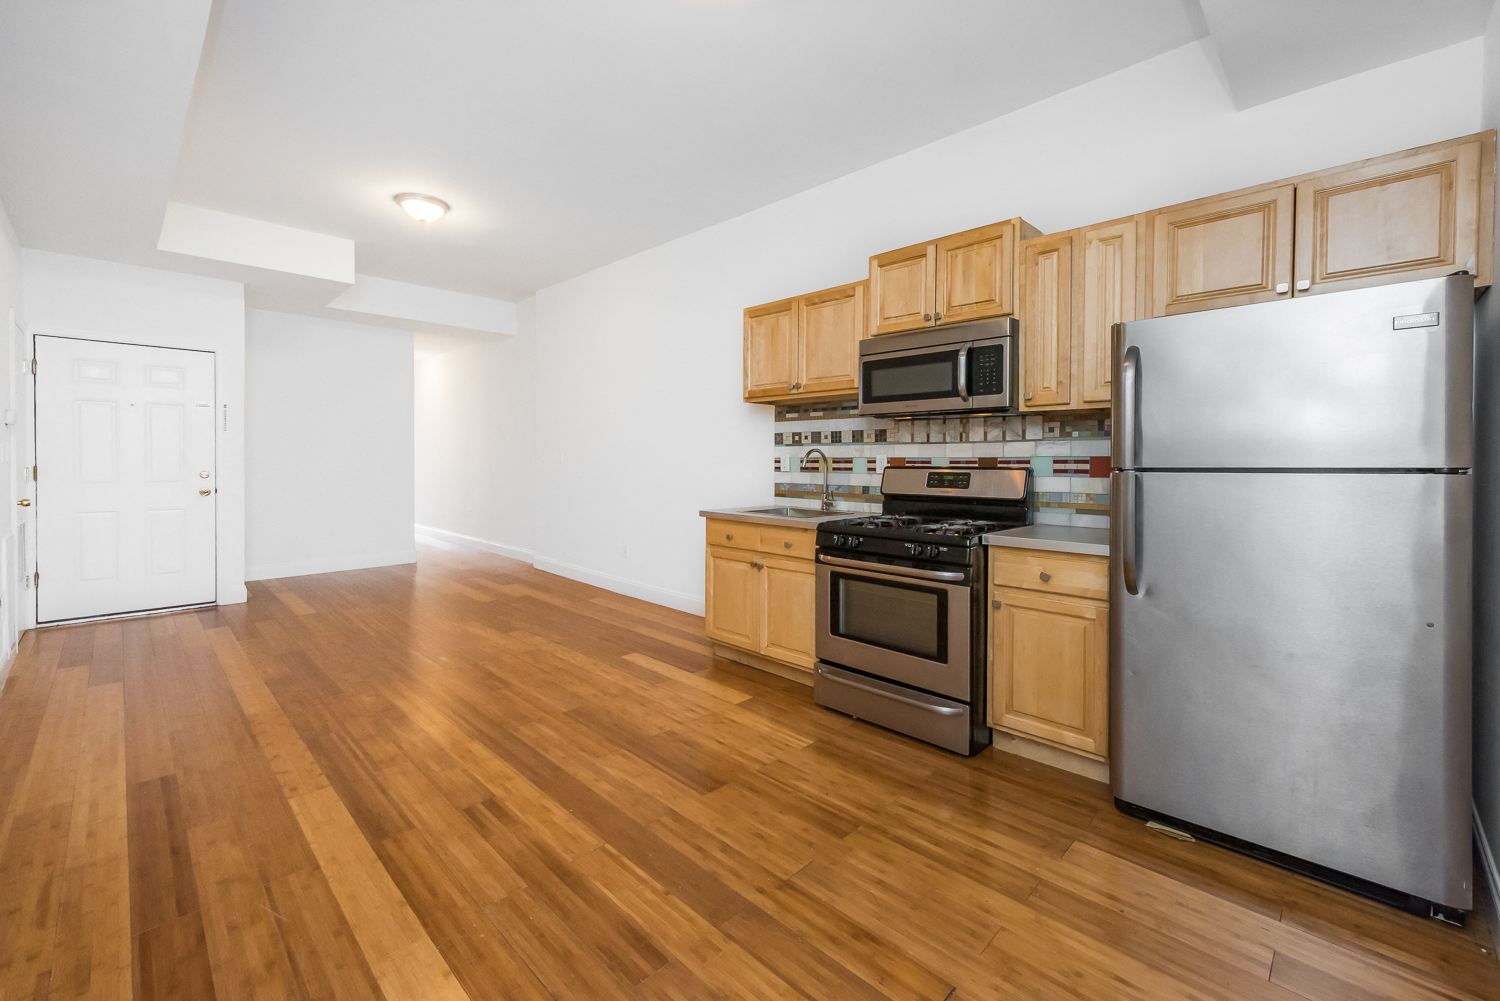 The Heights Apartments for Rent - Jersey City, NJ | RENTCafé